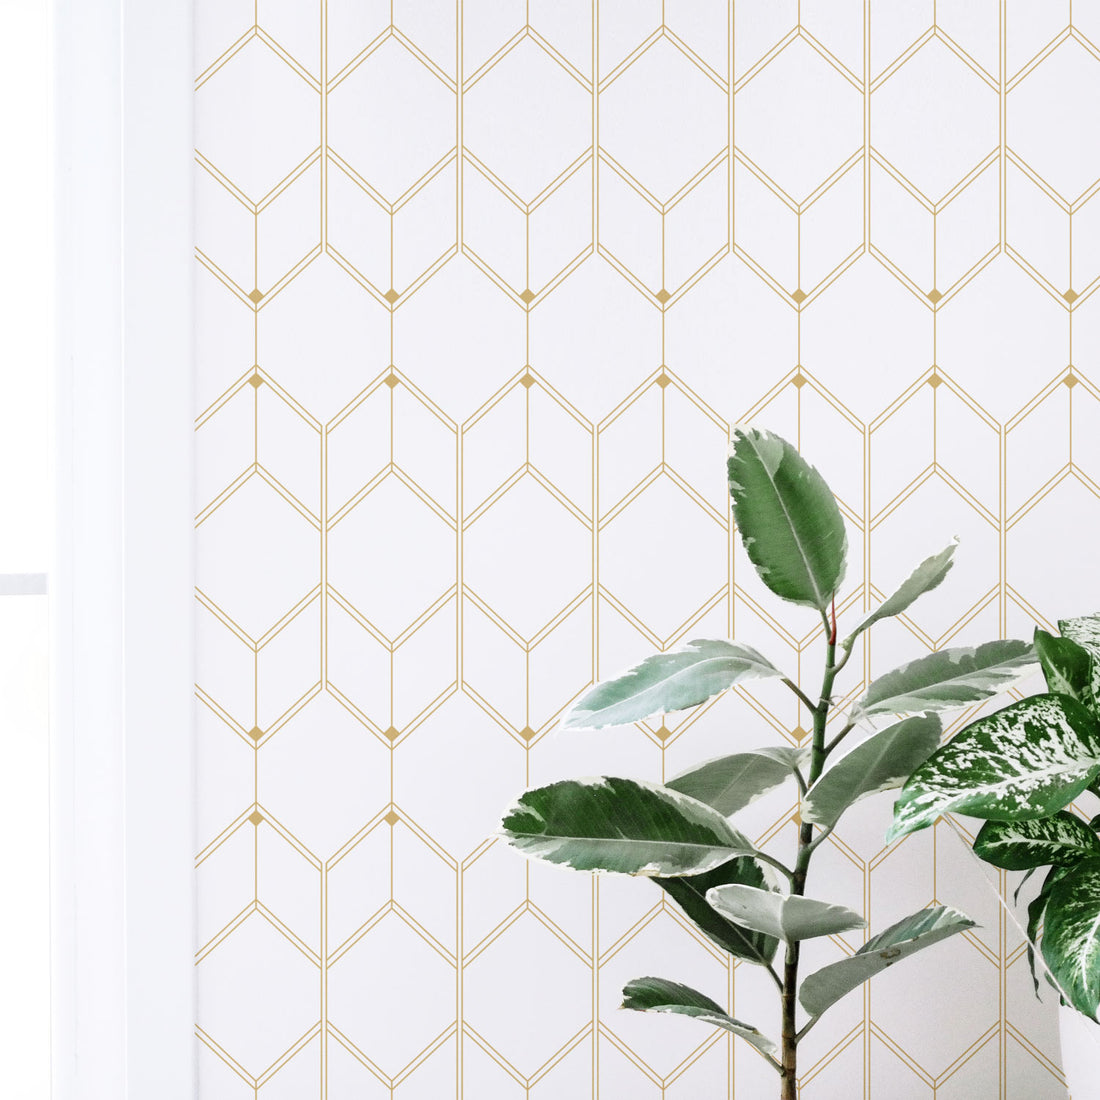 White and gold color removable wallpaper in light interior with greenery decor